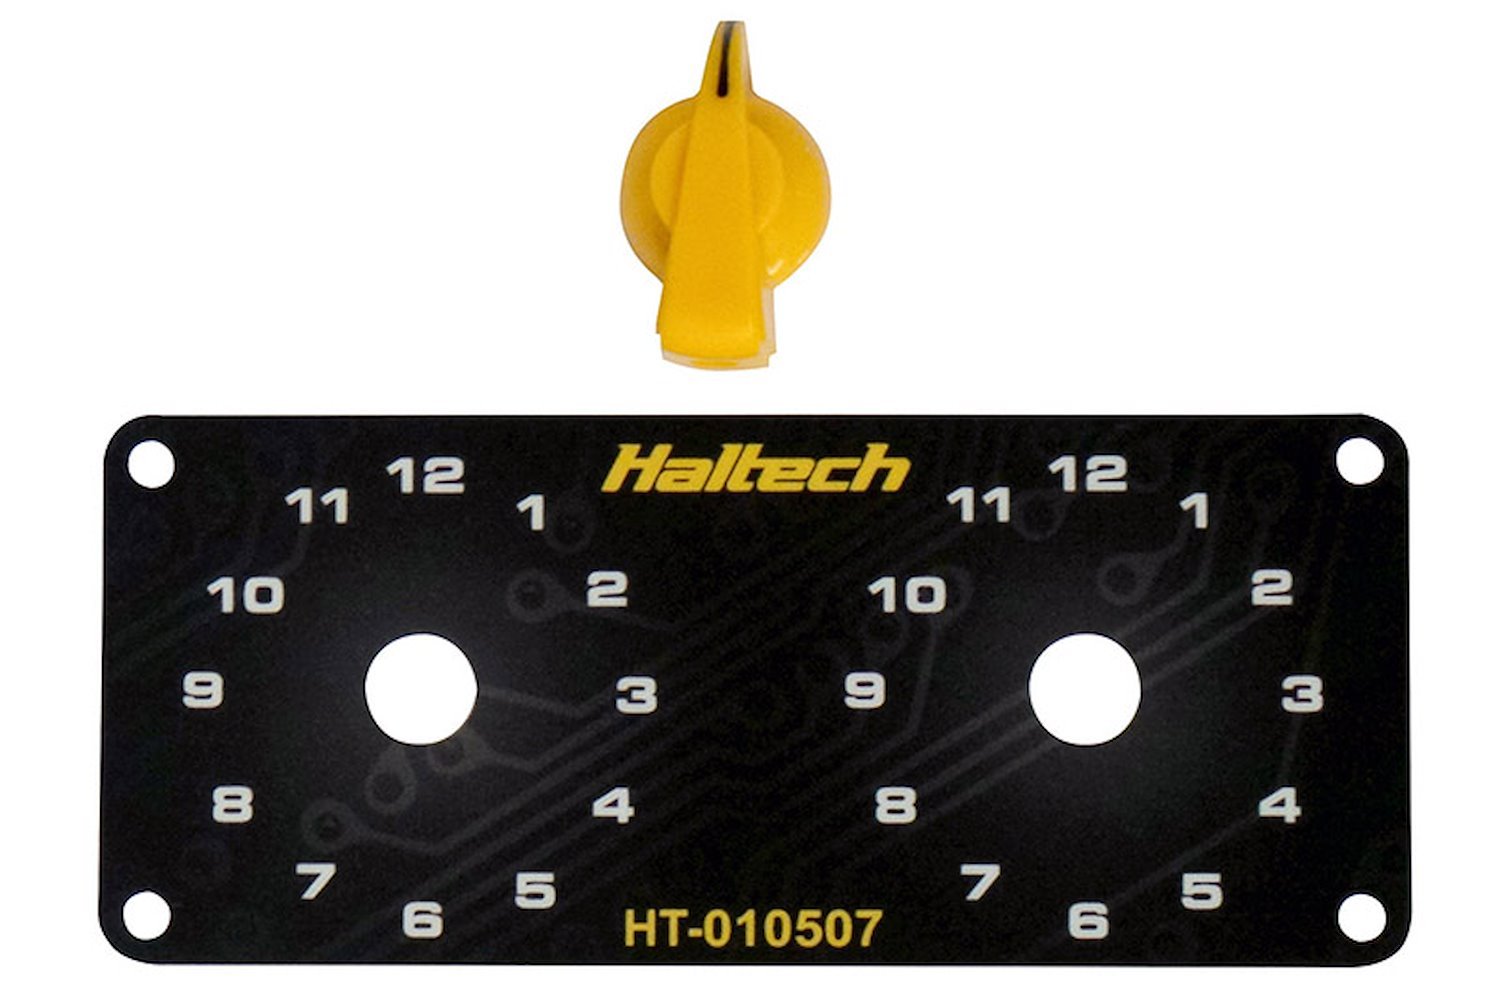 HT-010507 Dual Switch Panel Only, Includes Yellow Knob